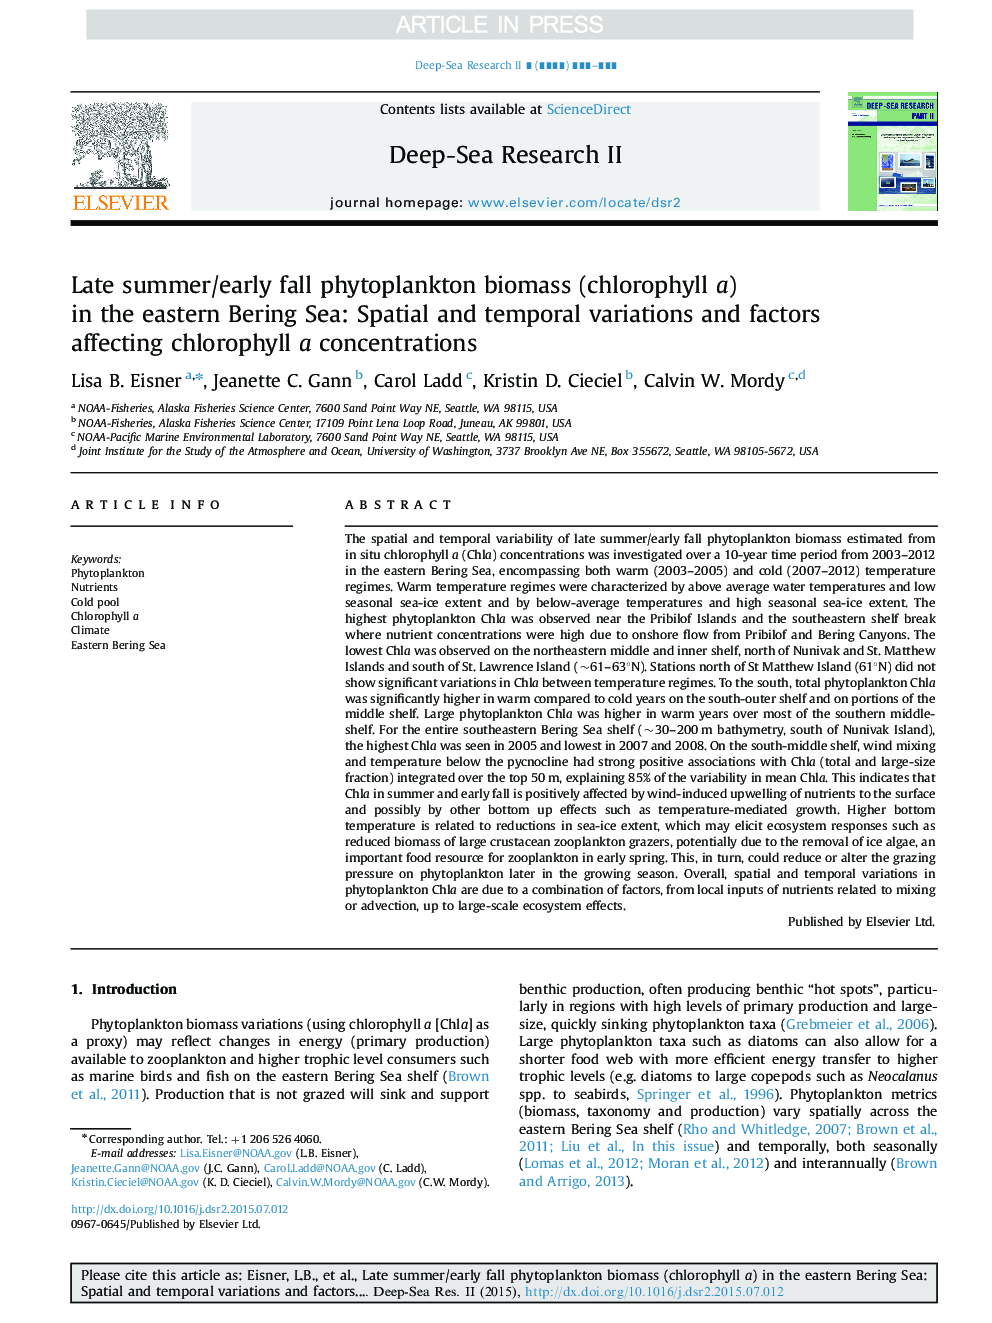 Late summer/early fall phytoplankton biomass (chlorophyll a) in the eastern Bering Sea: Spatial and temporal variations and factors affecting chlorophyll a concentrations